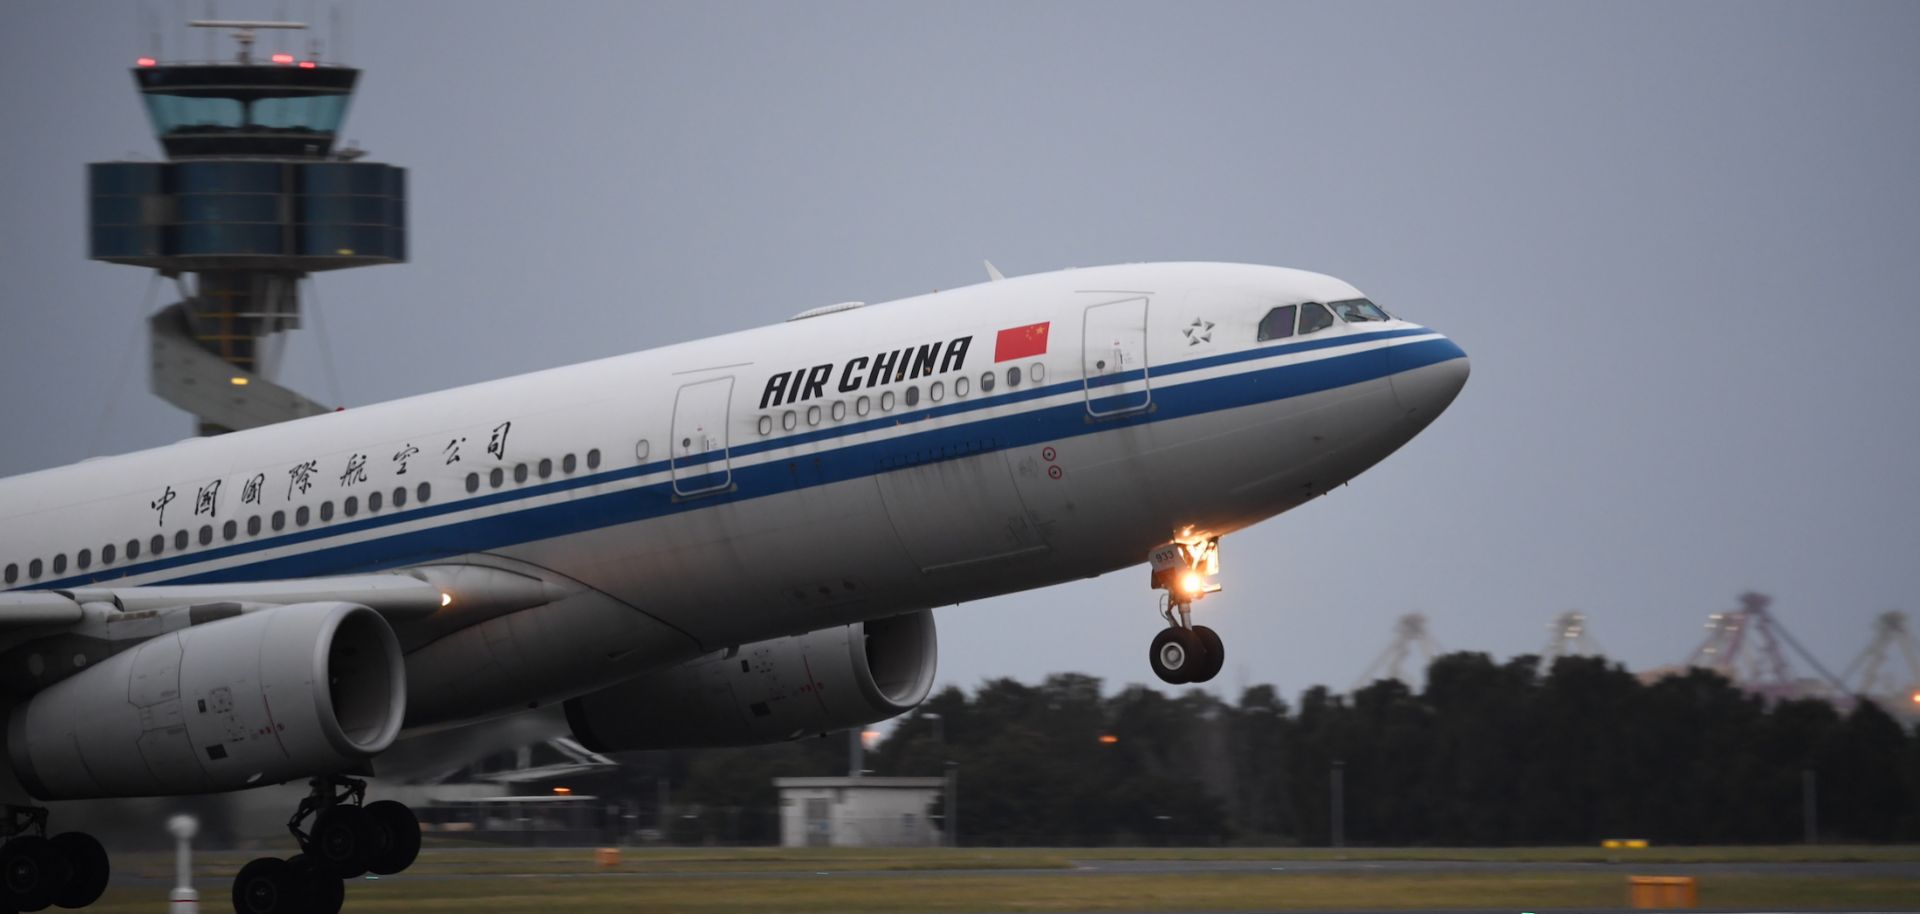 An Air China aircraft takes off at Sydney Kingsford Smith International Airport in Sydney, Australia.